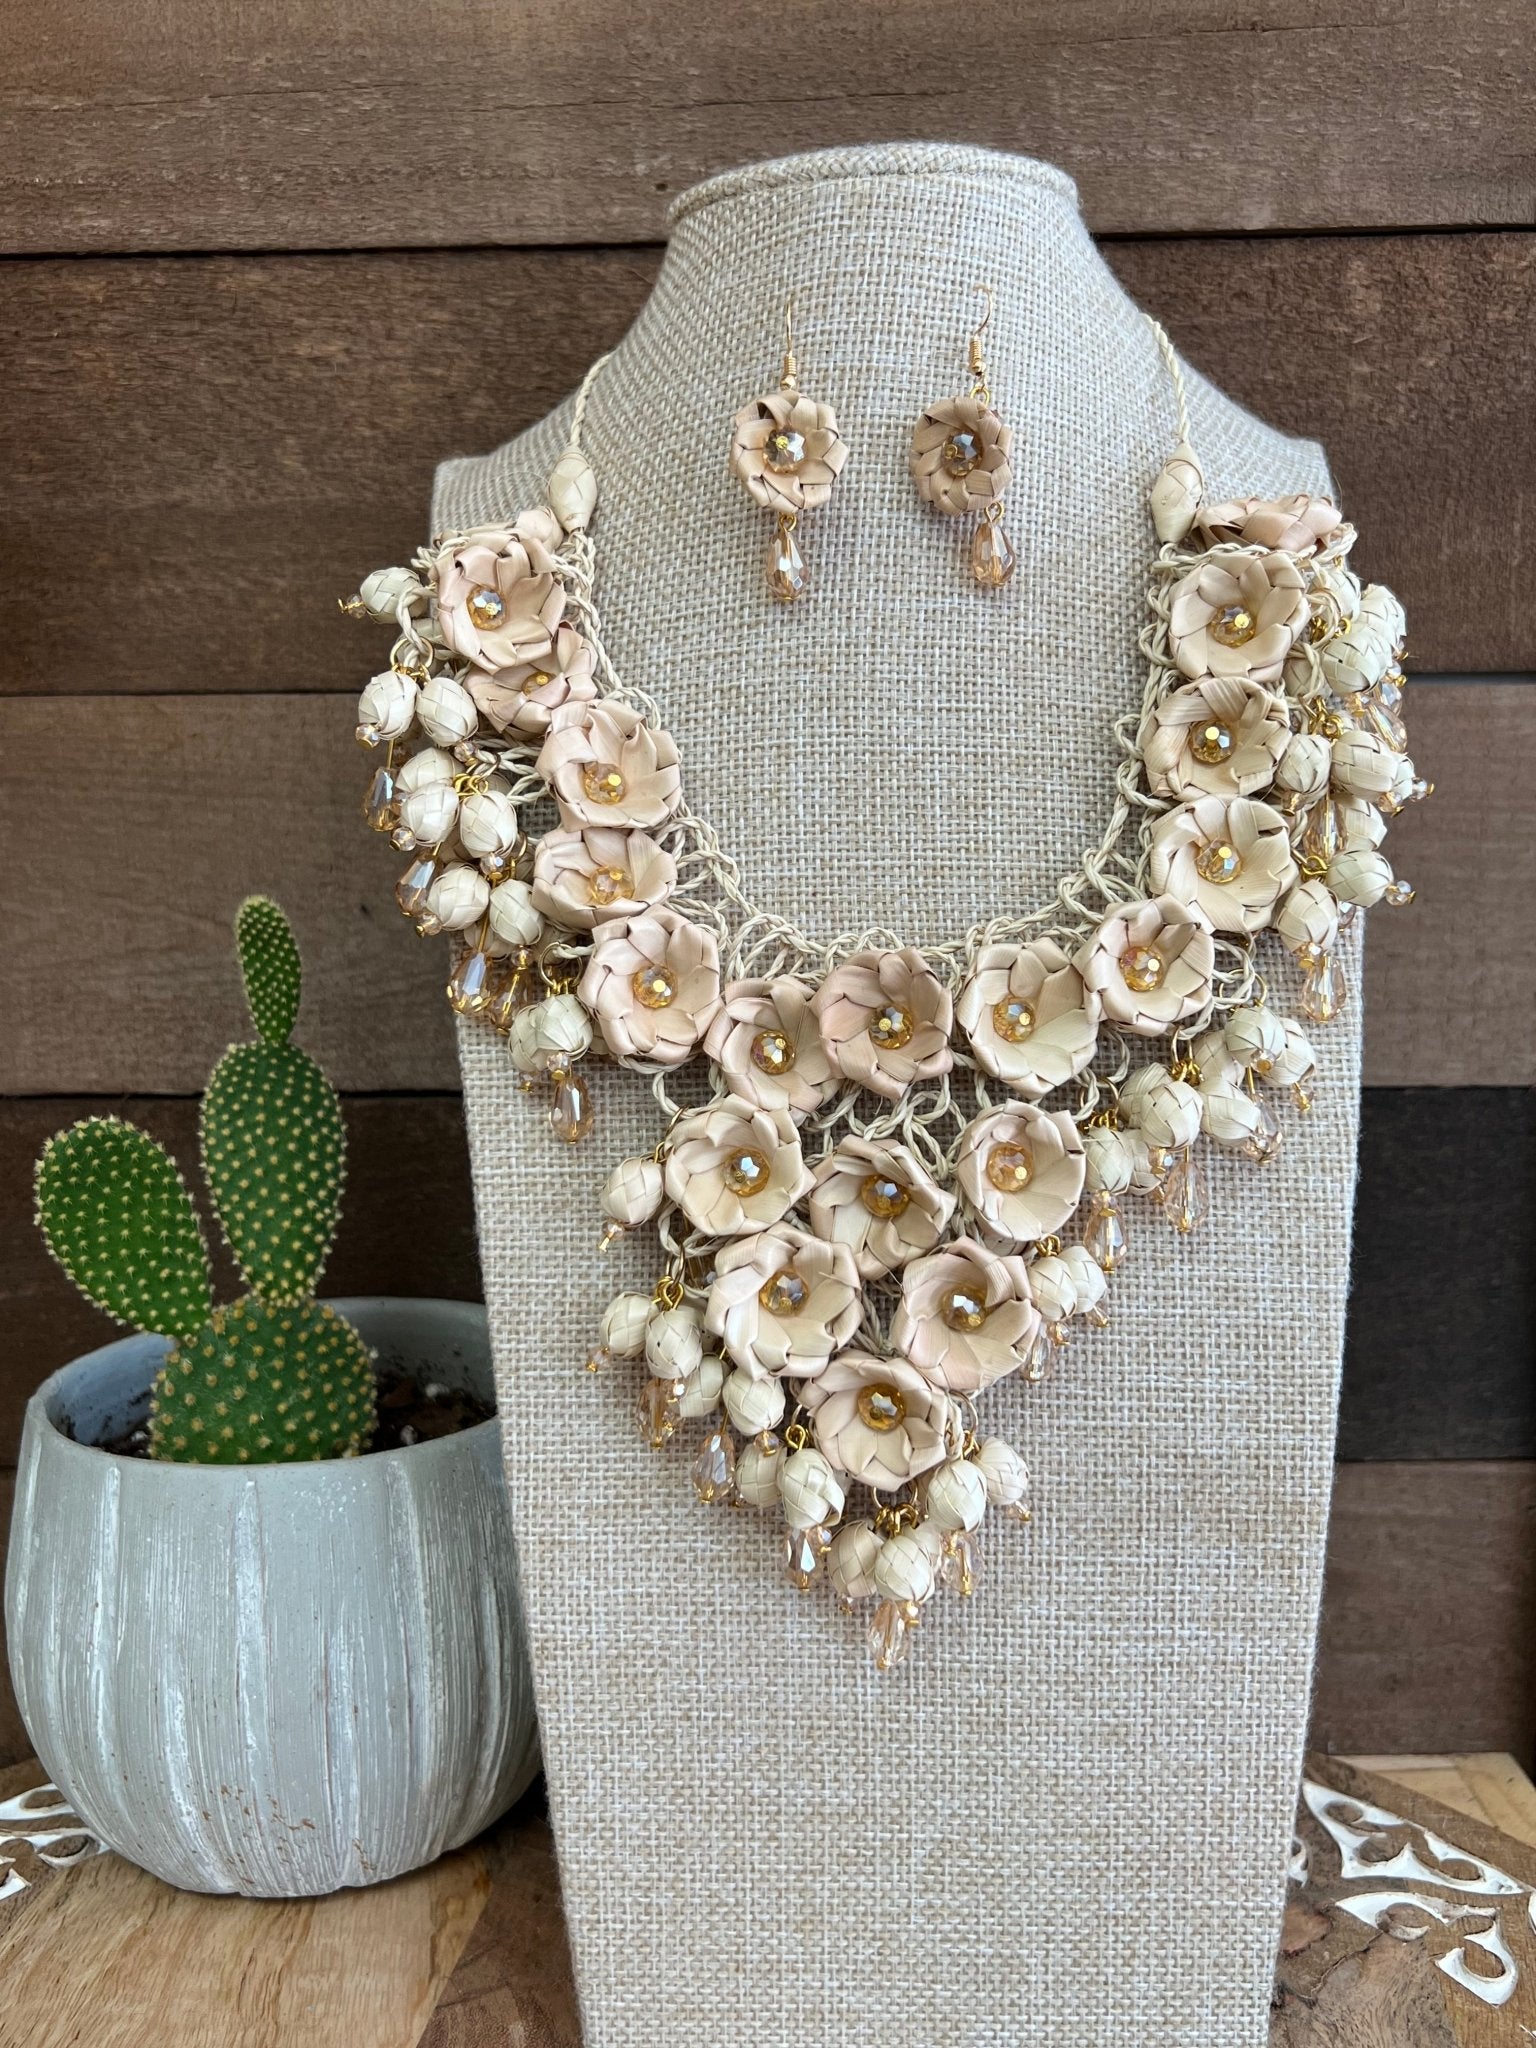 Mexican Palm Leaf Flower Necklace and Earrings Jewelry Set. Collar de Palma Corto. - Solei Store